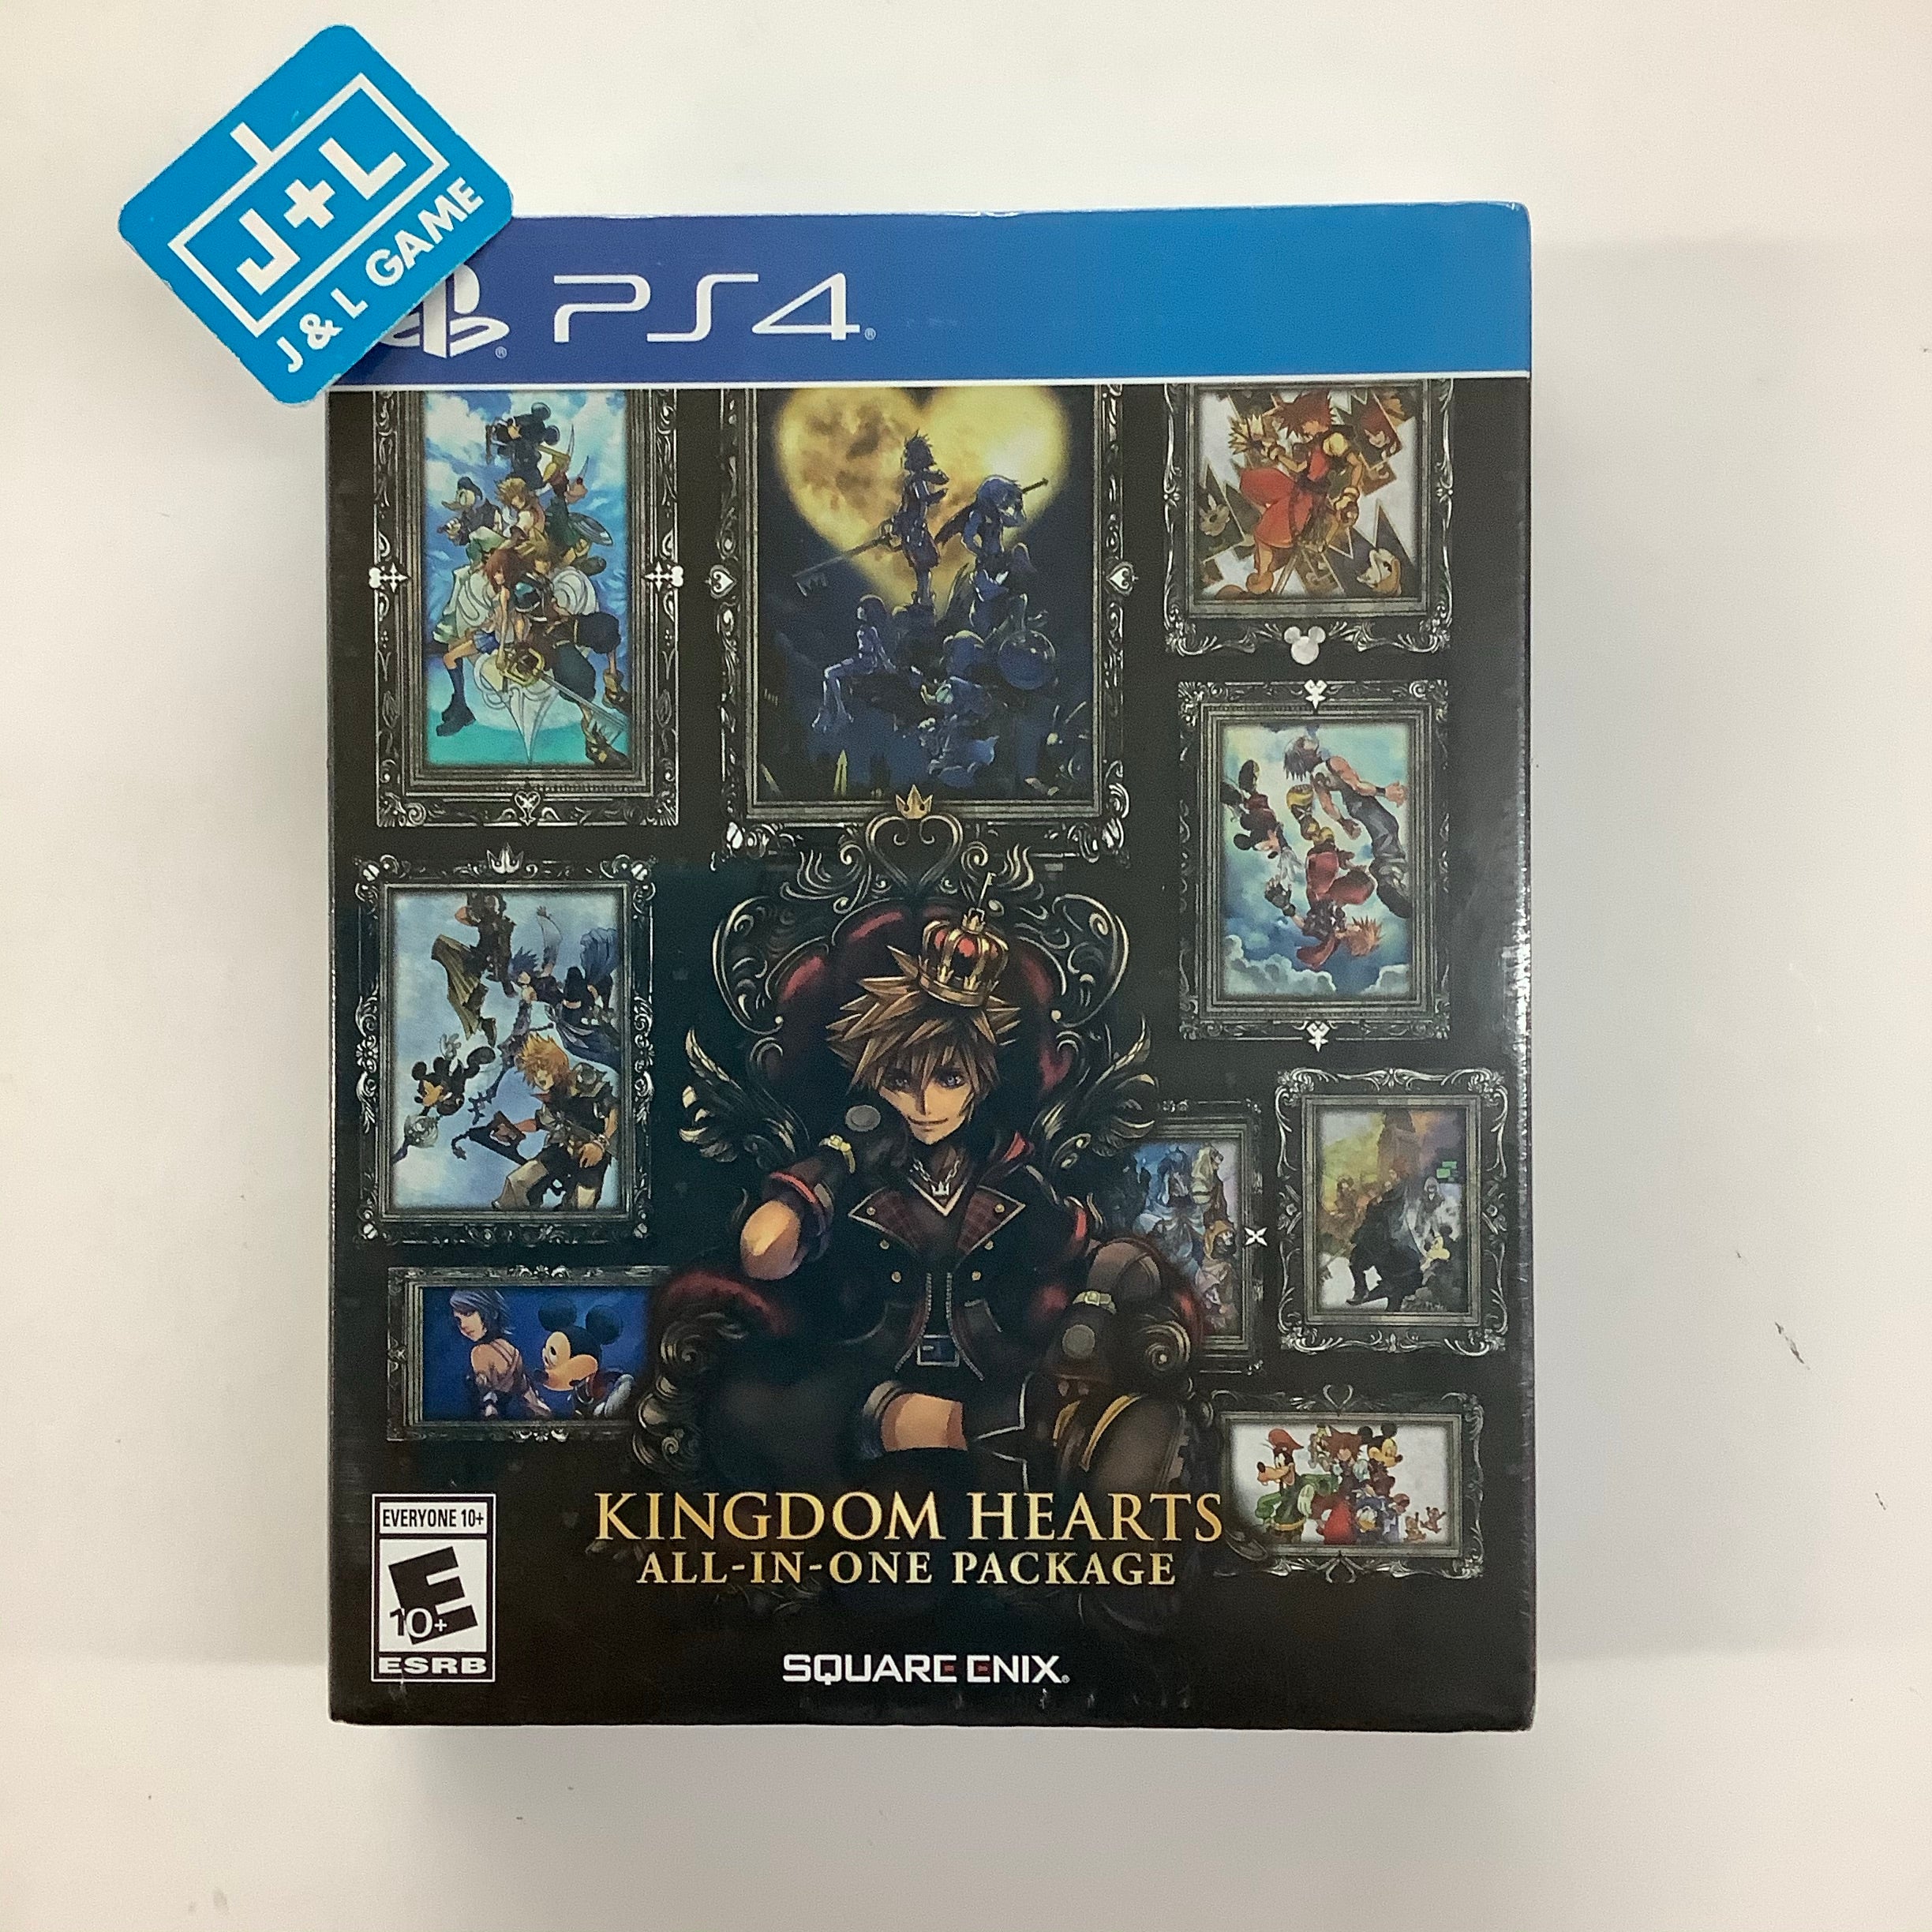 Kingdom Hearts: All-In-One Package, Square Enix, PlayStation 4